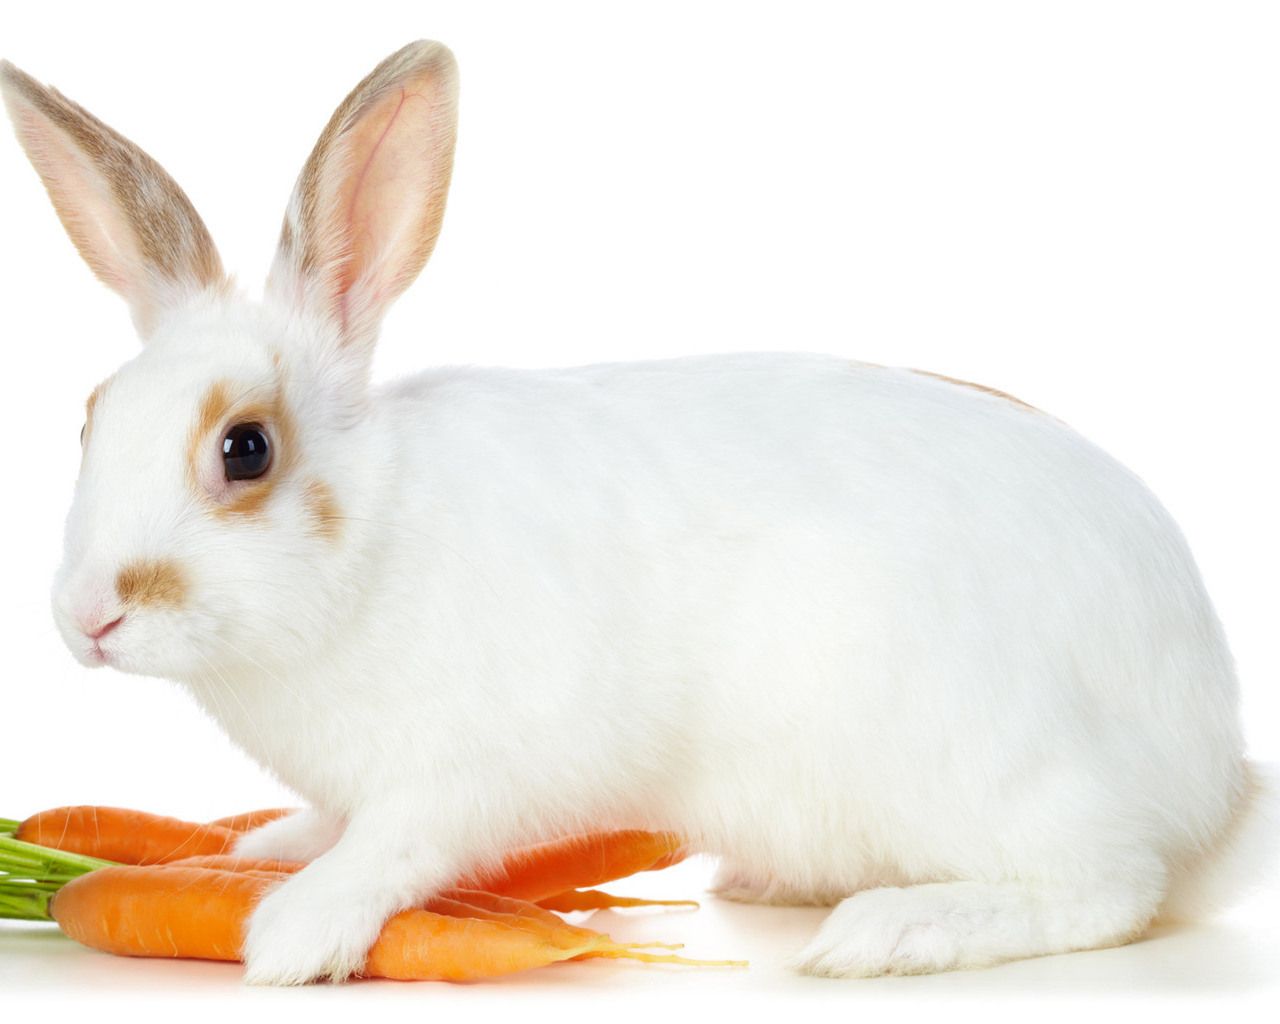 All About Animal Wildlife: Cute White Rabbit HD Wallpaper 2012